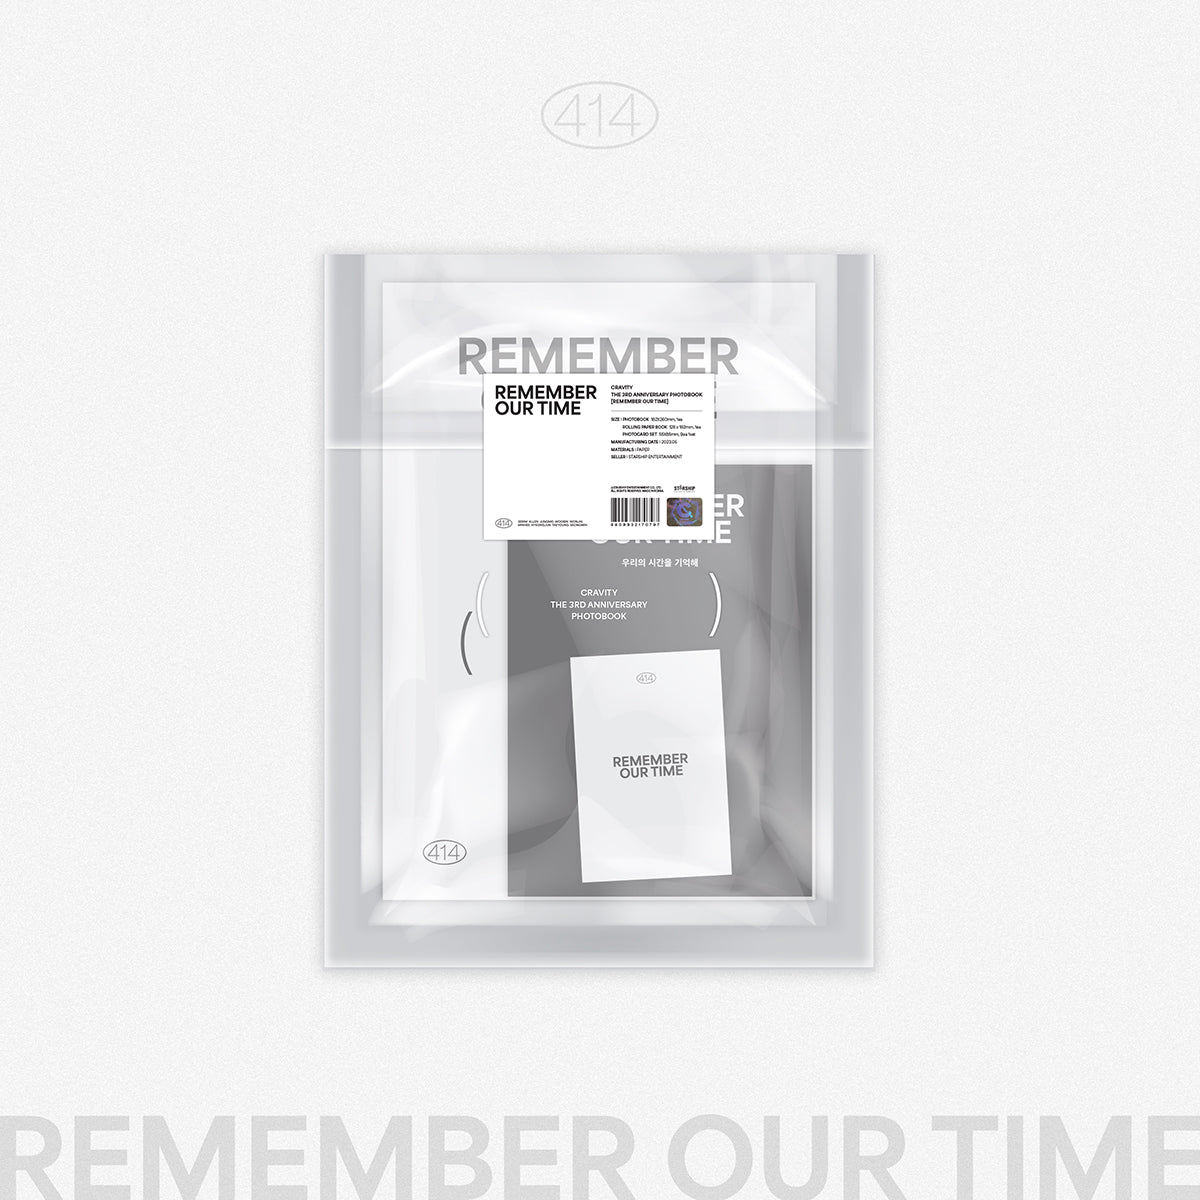 CRAVITY - THE 3RD ANNIVERSARY PHOTOBOOK [REMEMBER OUR TIME]